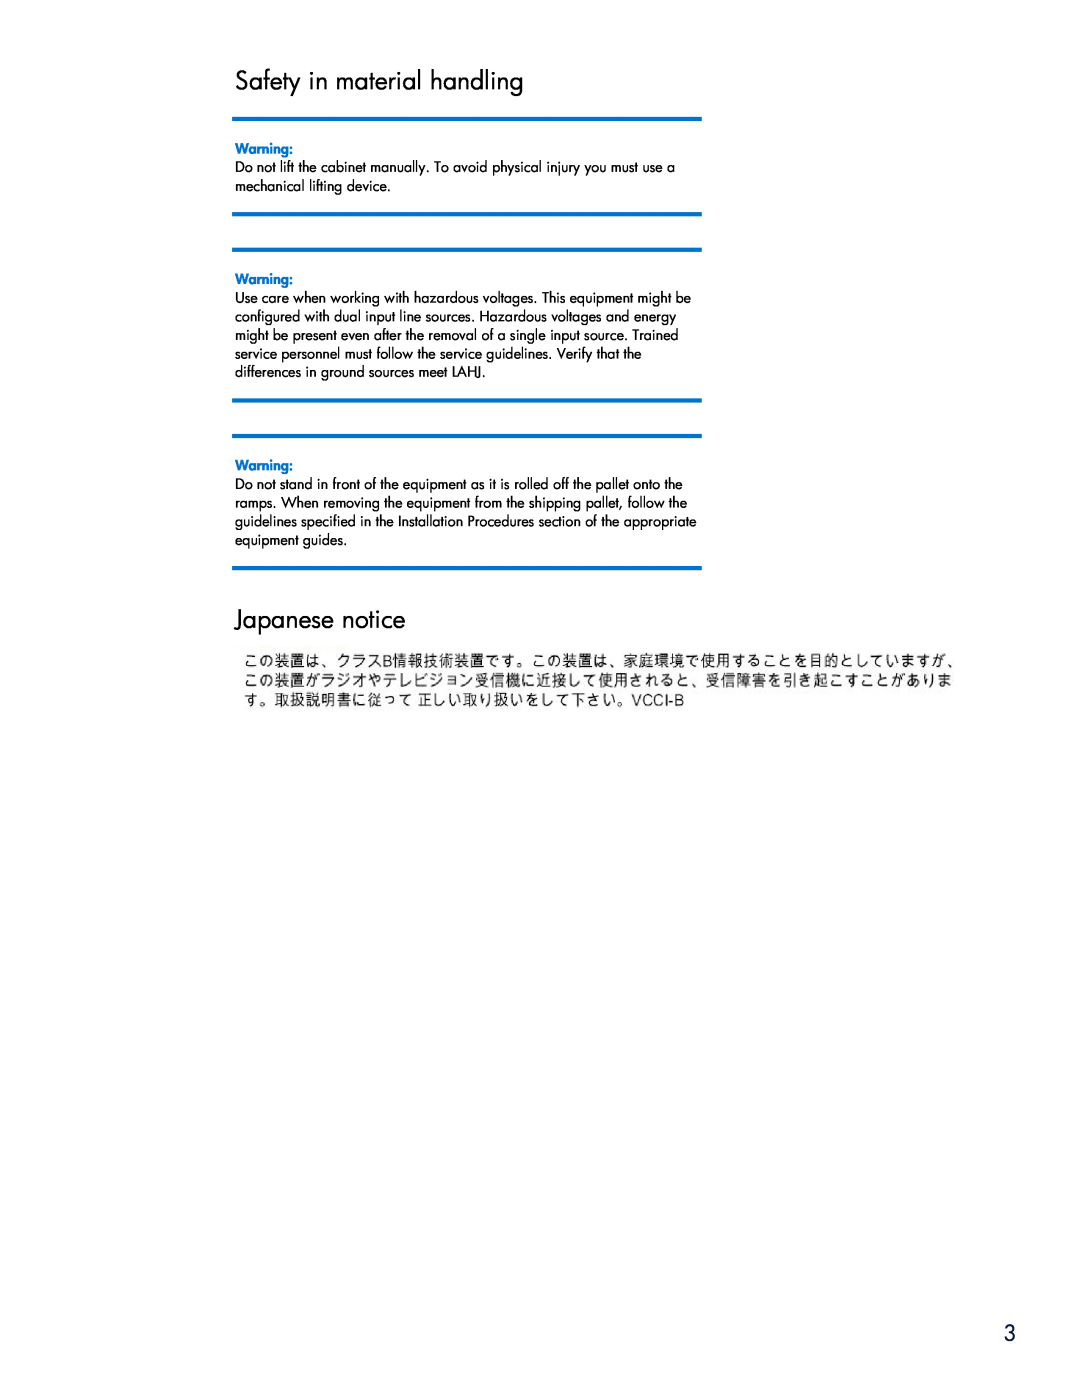 HP Modular Cooling System manual Safety in material handling, Japanese notice 